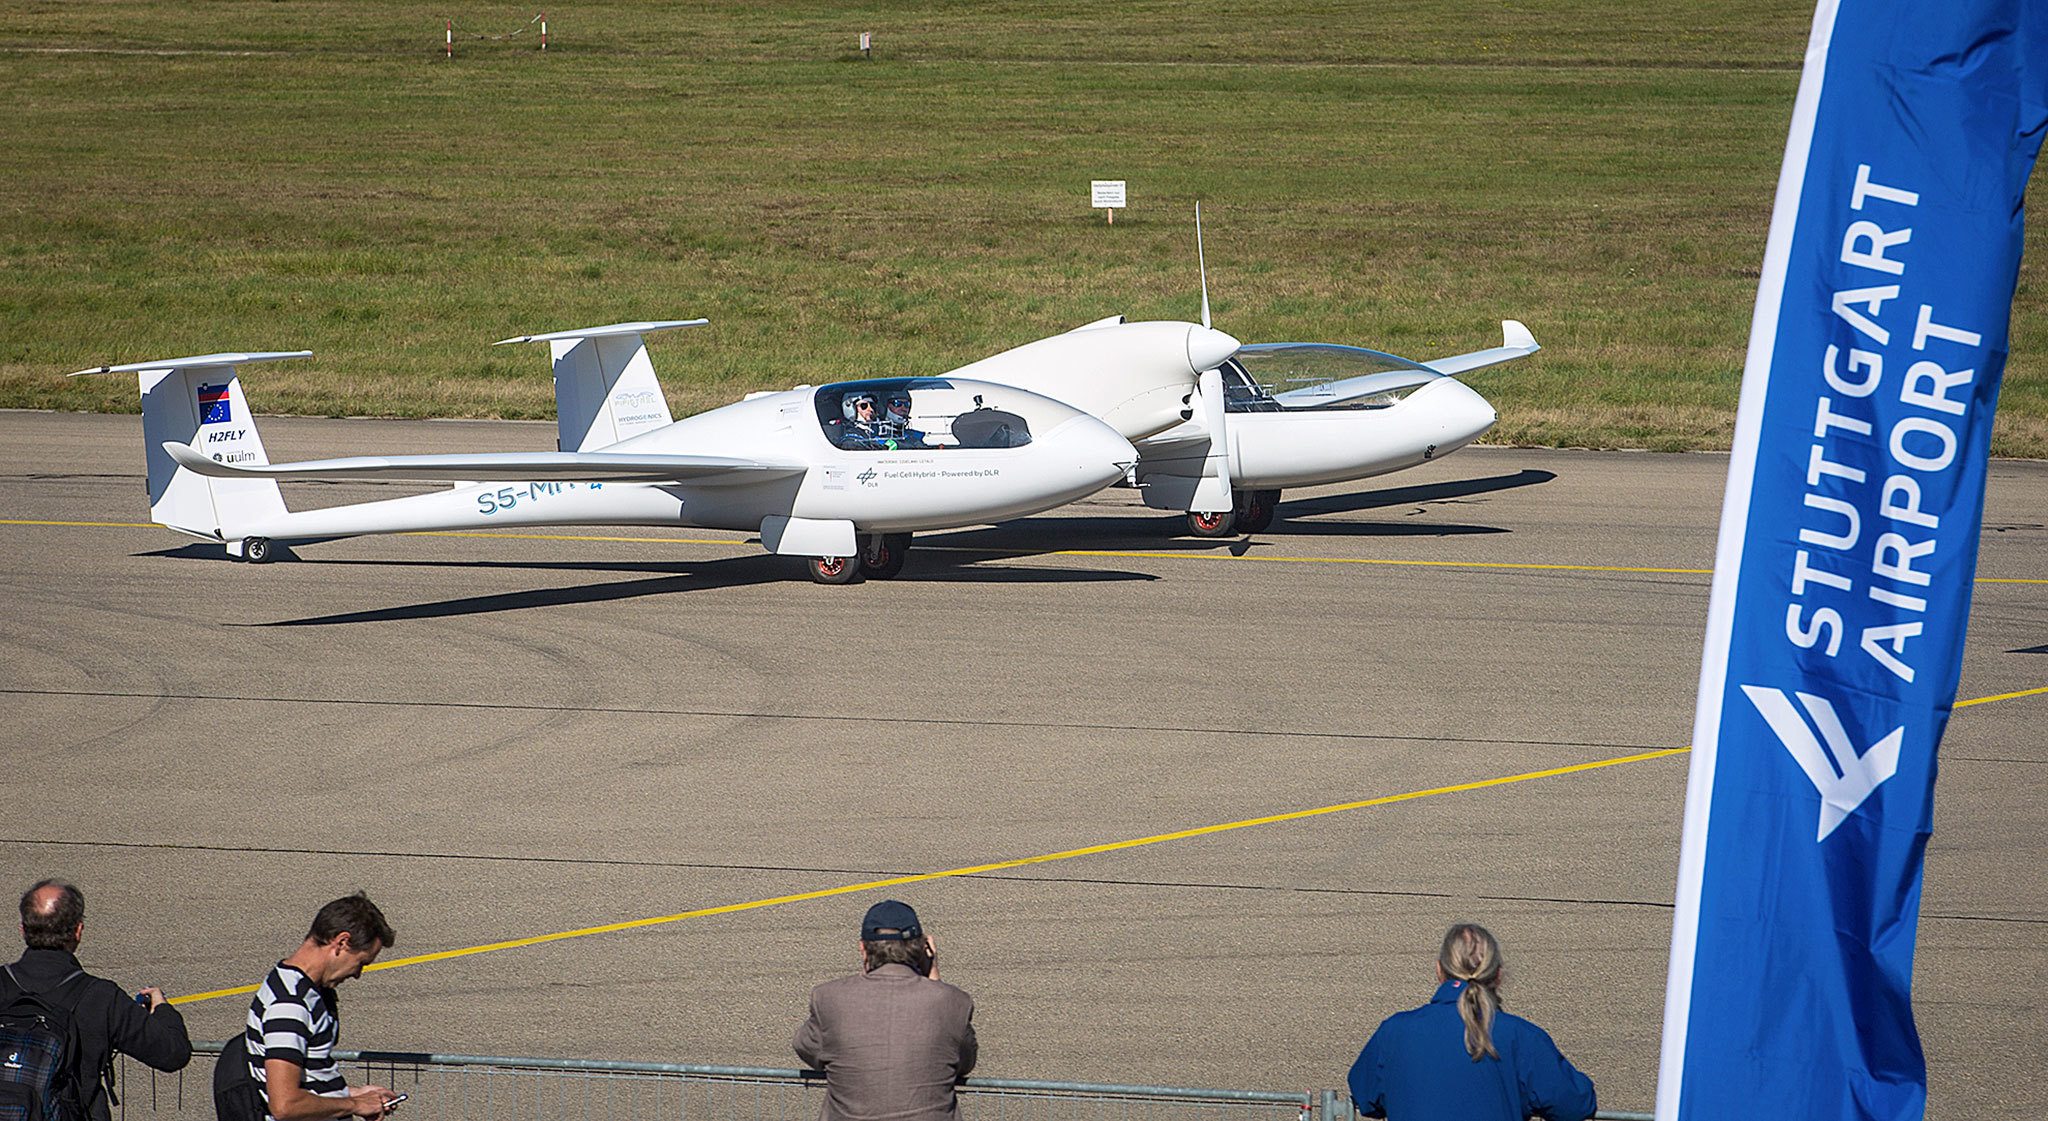 The world’s first four-seater plane that uses emission-free hybrid fuel-cells to fly is pictured at the airport in Stuttgart, Germany, on Thursday. (Christoph Schmidt/dpa)